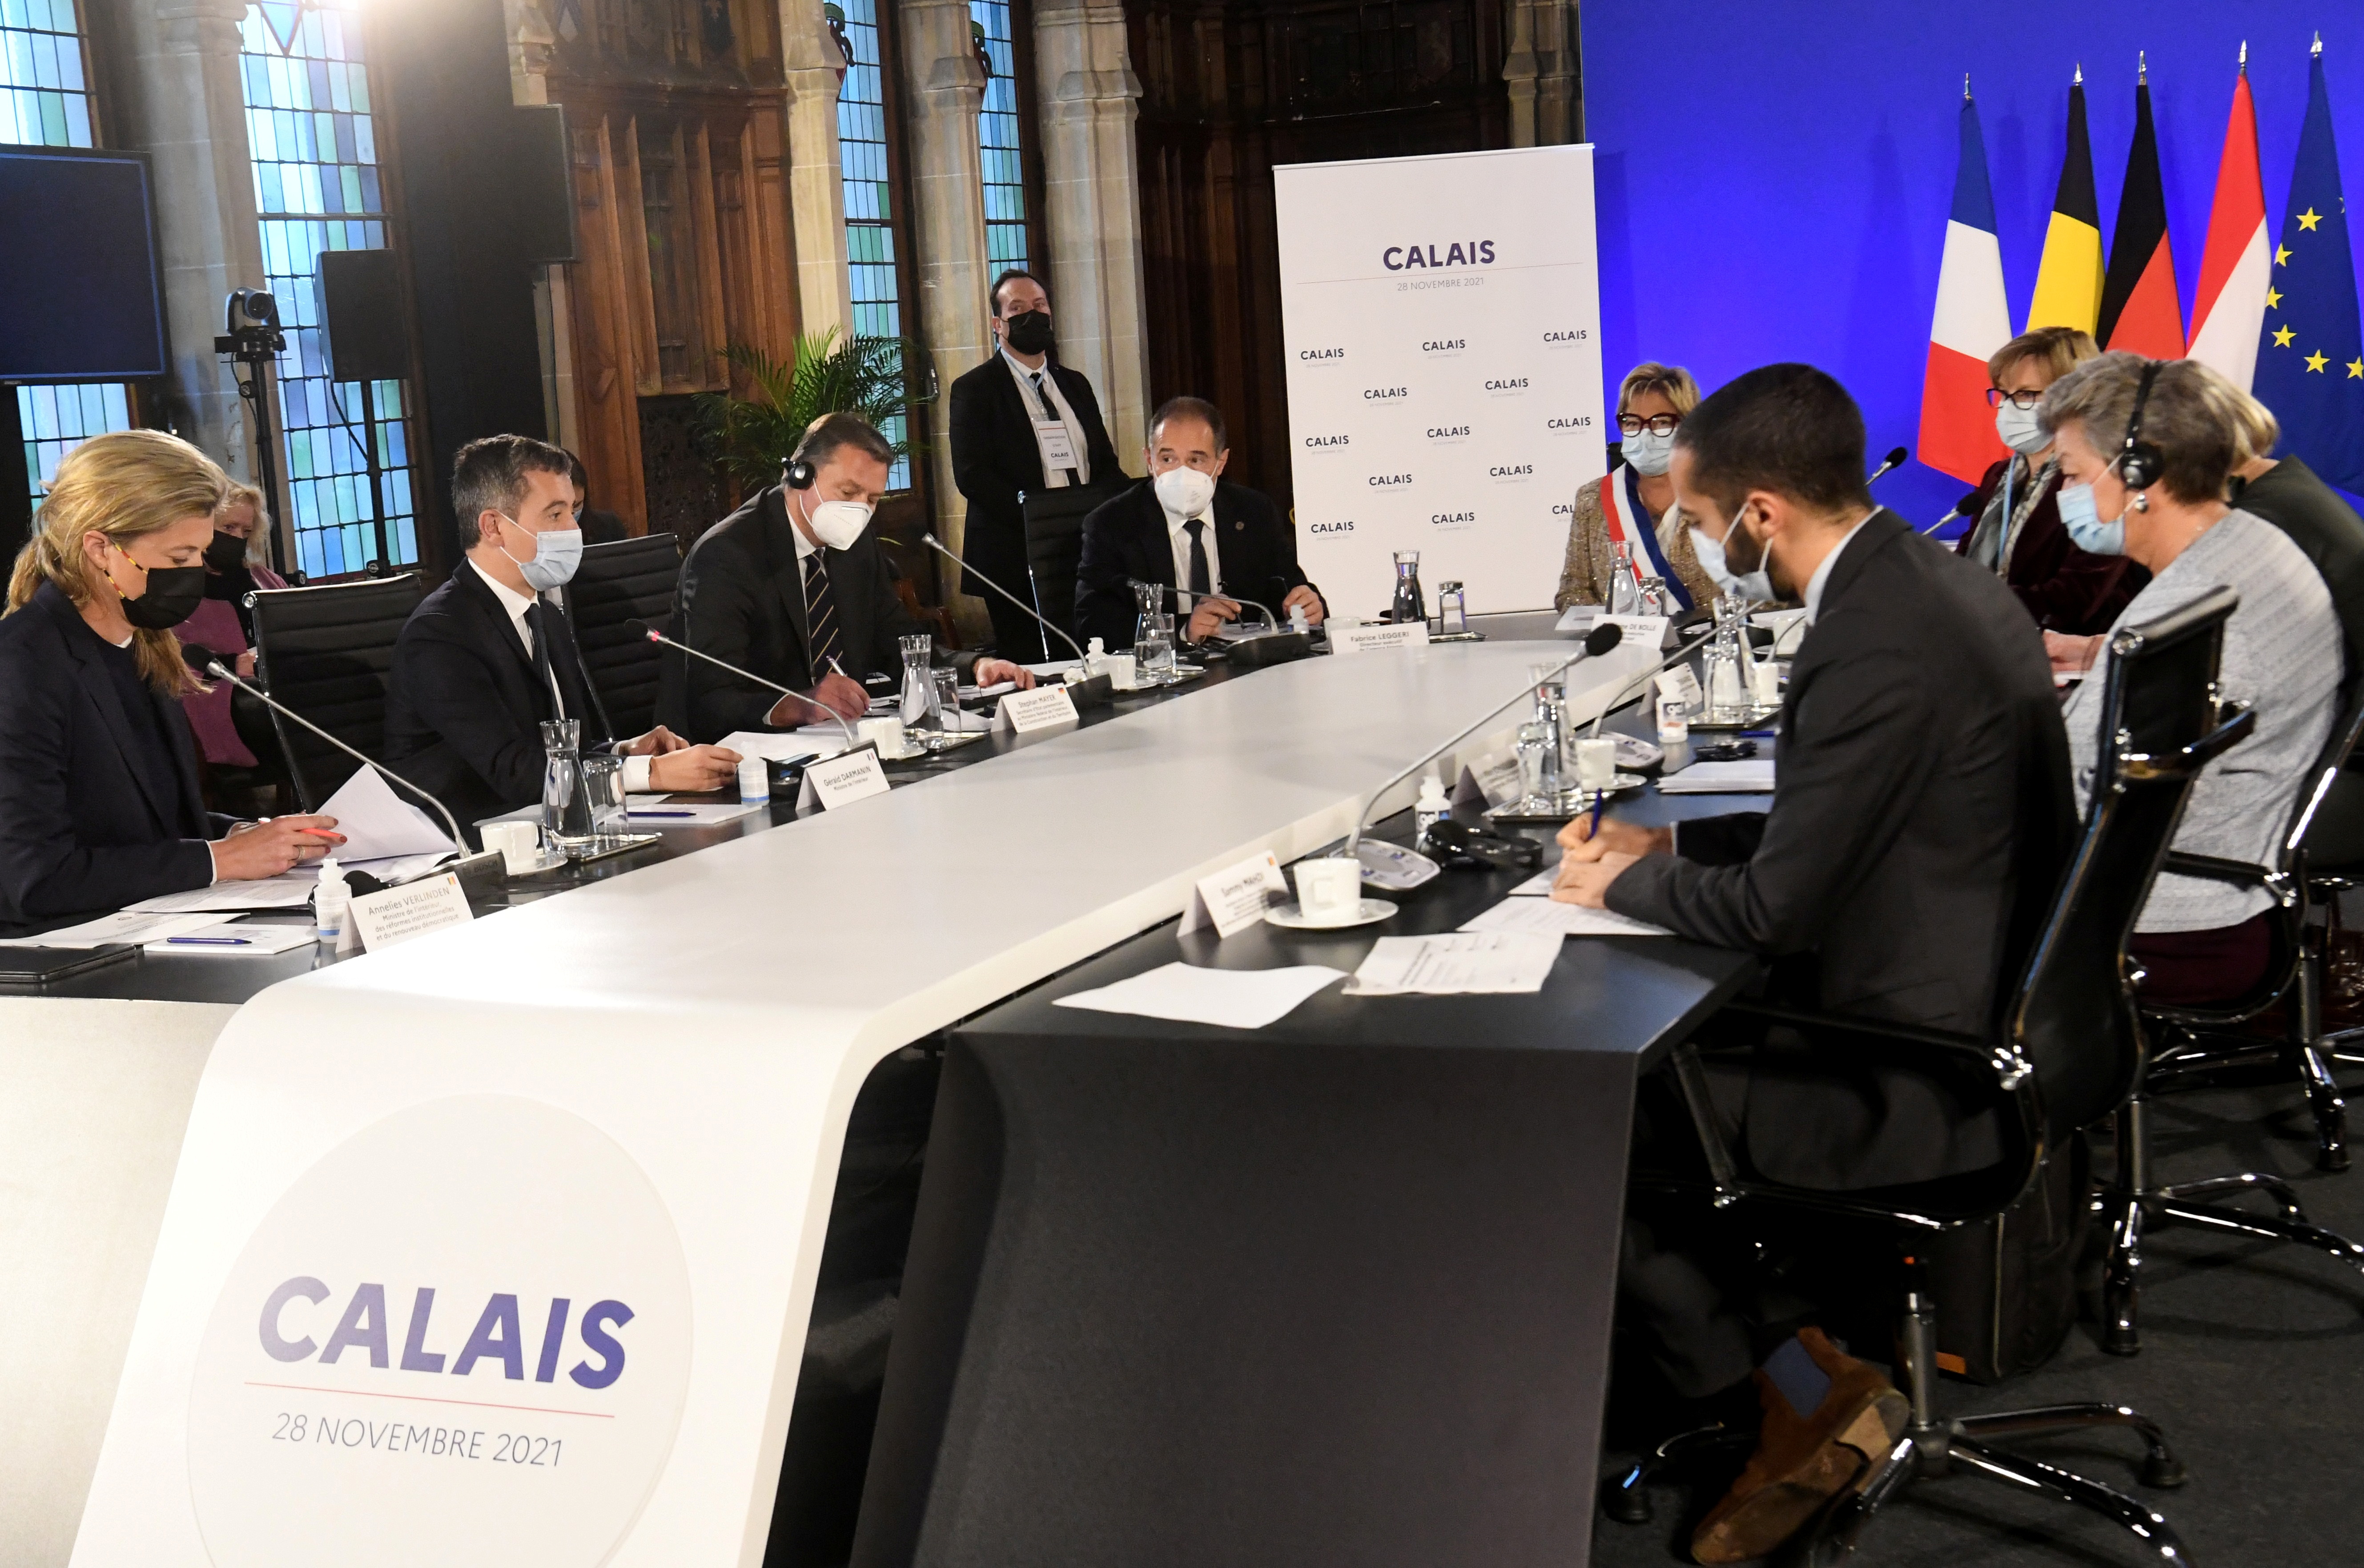 Meeting in response to cross-Channel migration, in Calais